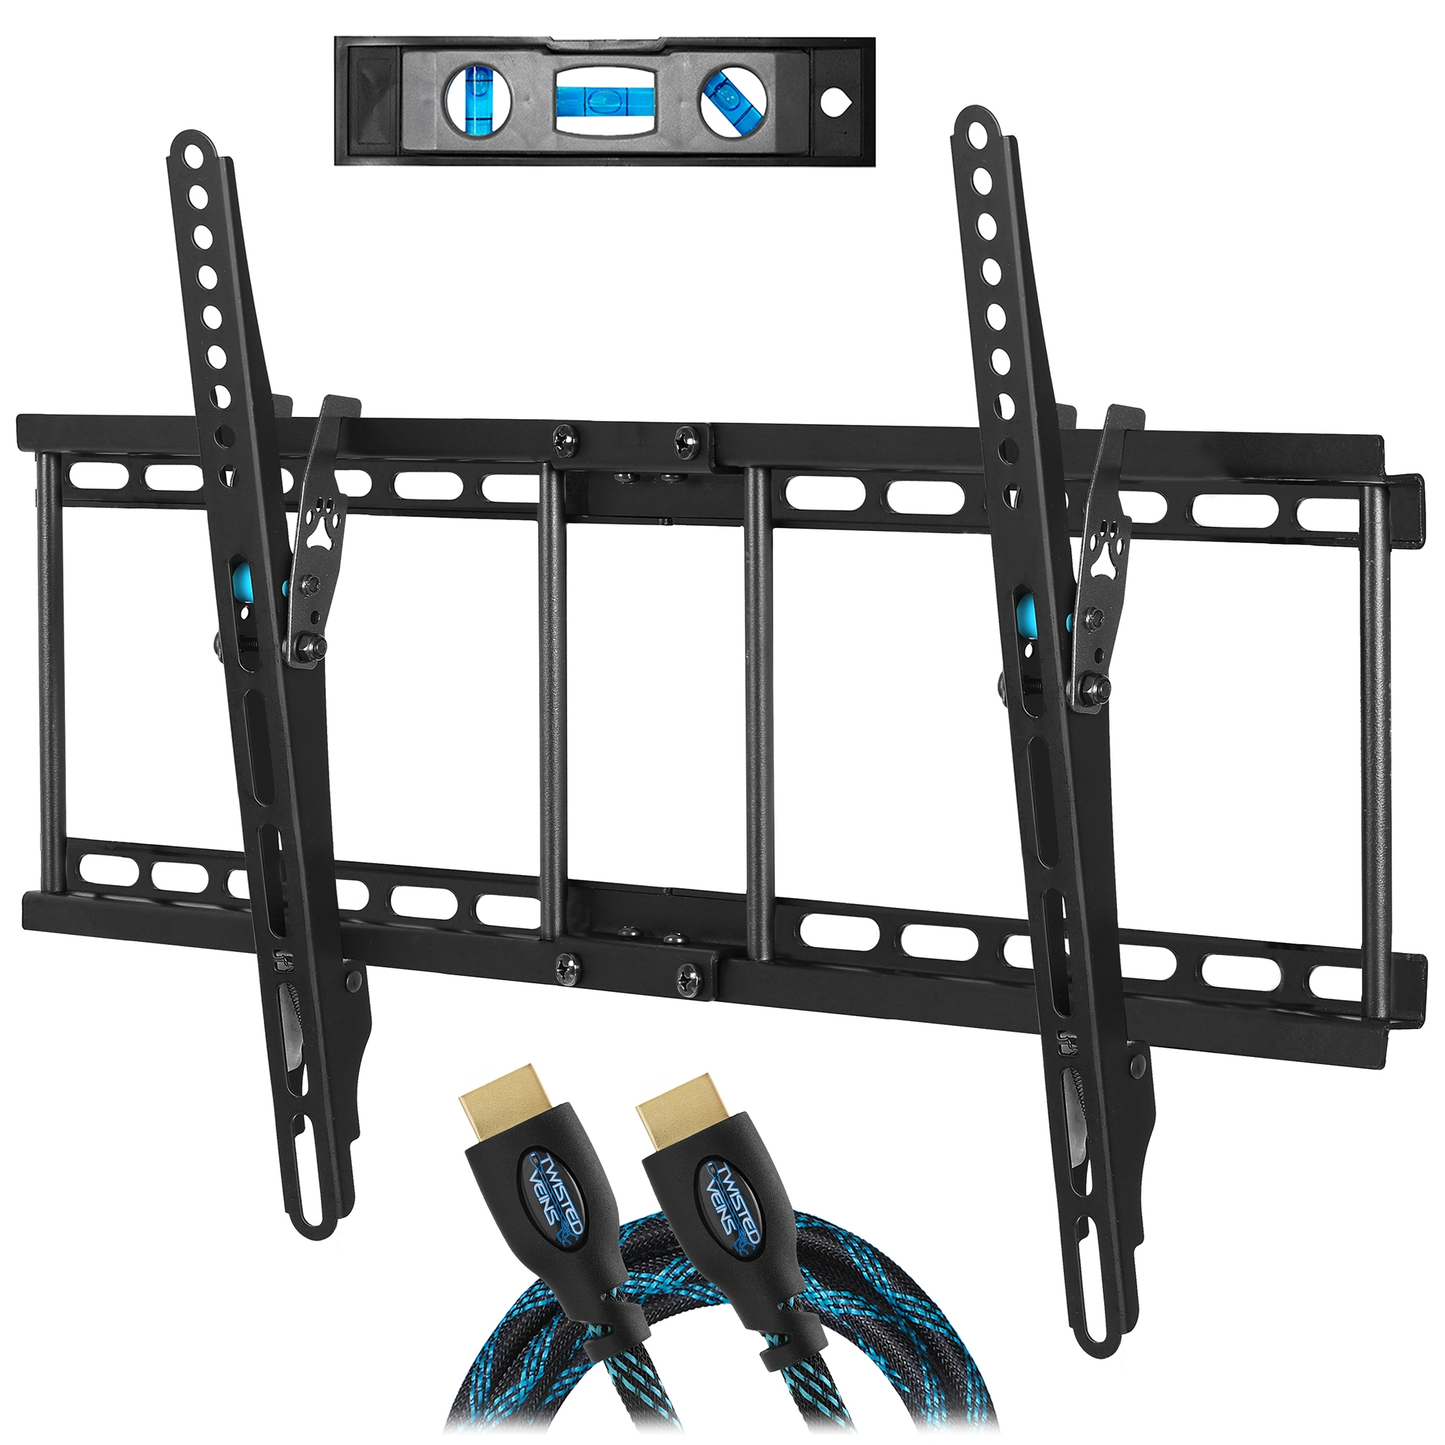 (B-STOCK) Cheetah APTMM2B TV Wall Mount for 20-80" TVs (some up to 90”) up to VESA 600 and 165lbs